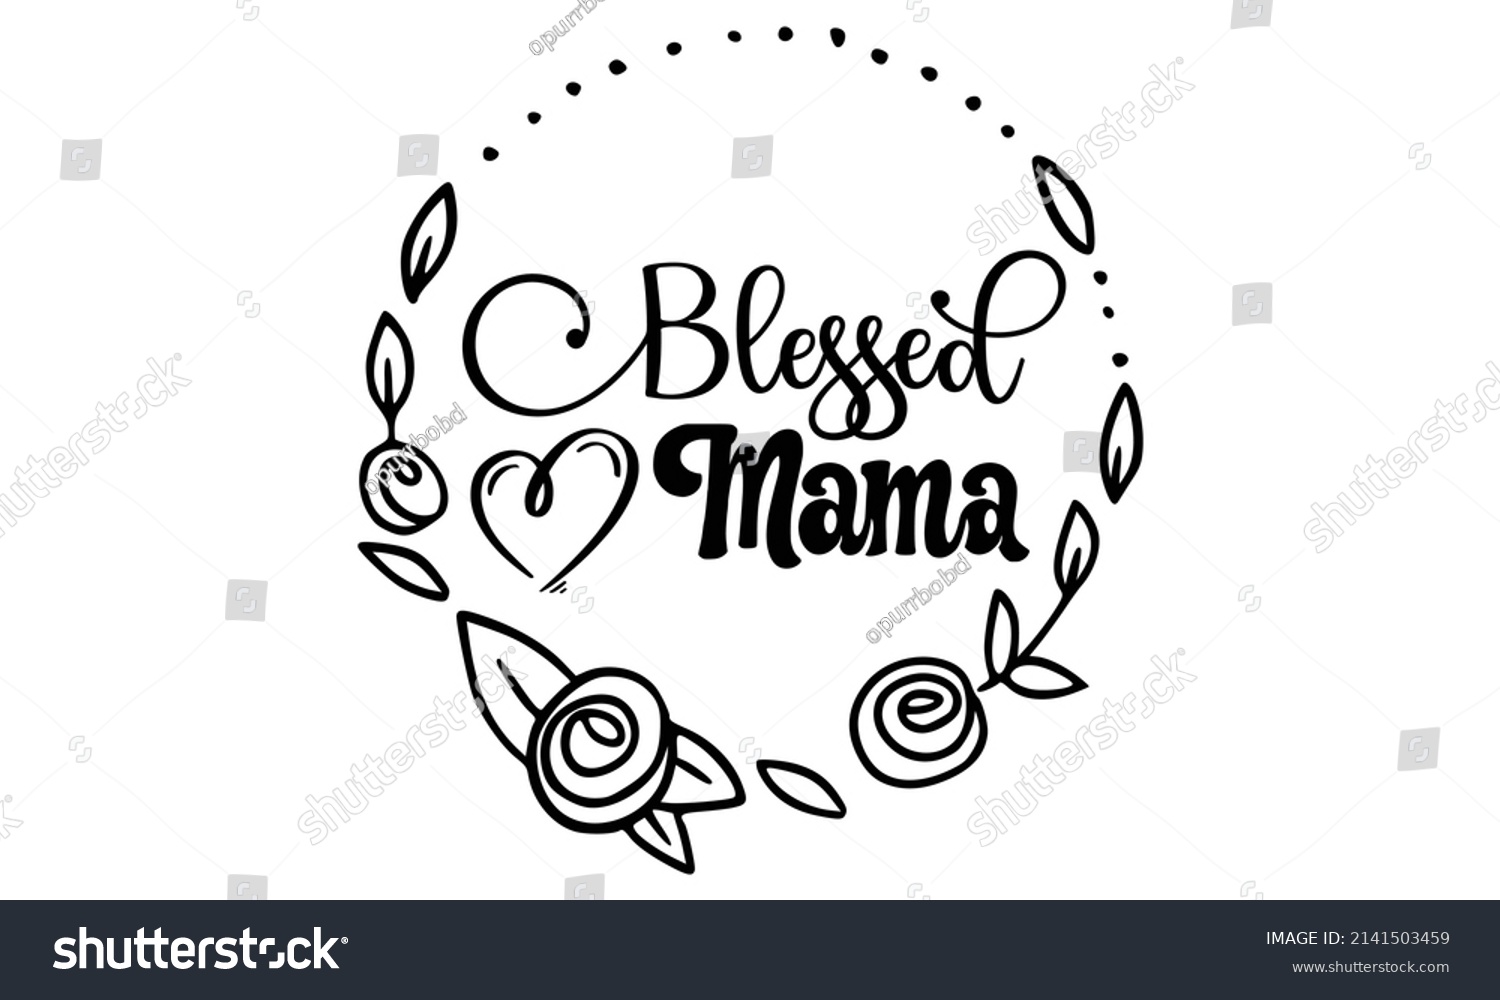 SVG of Blessed mama- Mother's day t-shirt design, Hand drawn lettering phrase, Calligraphy t-shirt design, Isolated on white background, Handwritten vector sign, SVG, EPS 10 svg